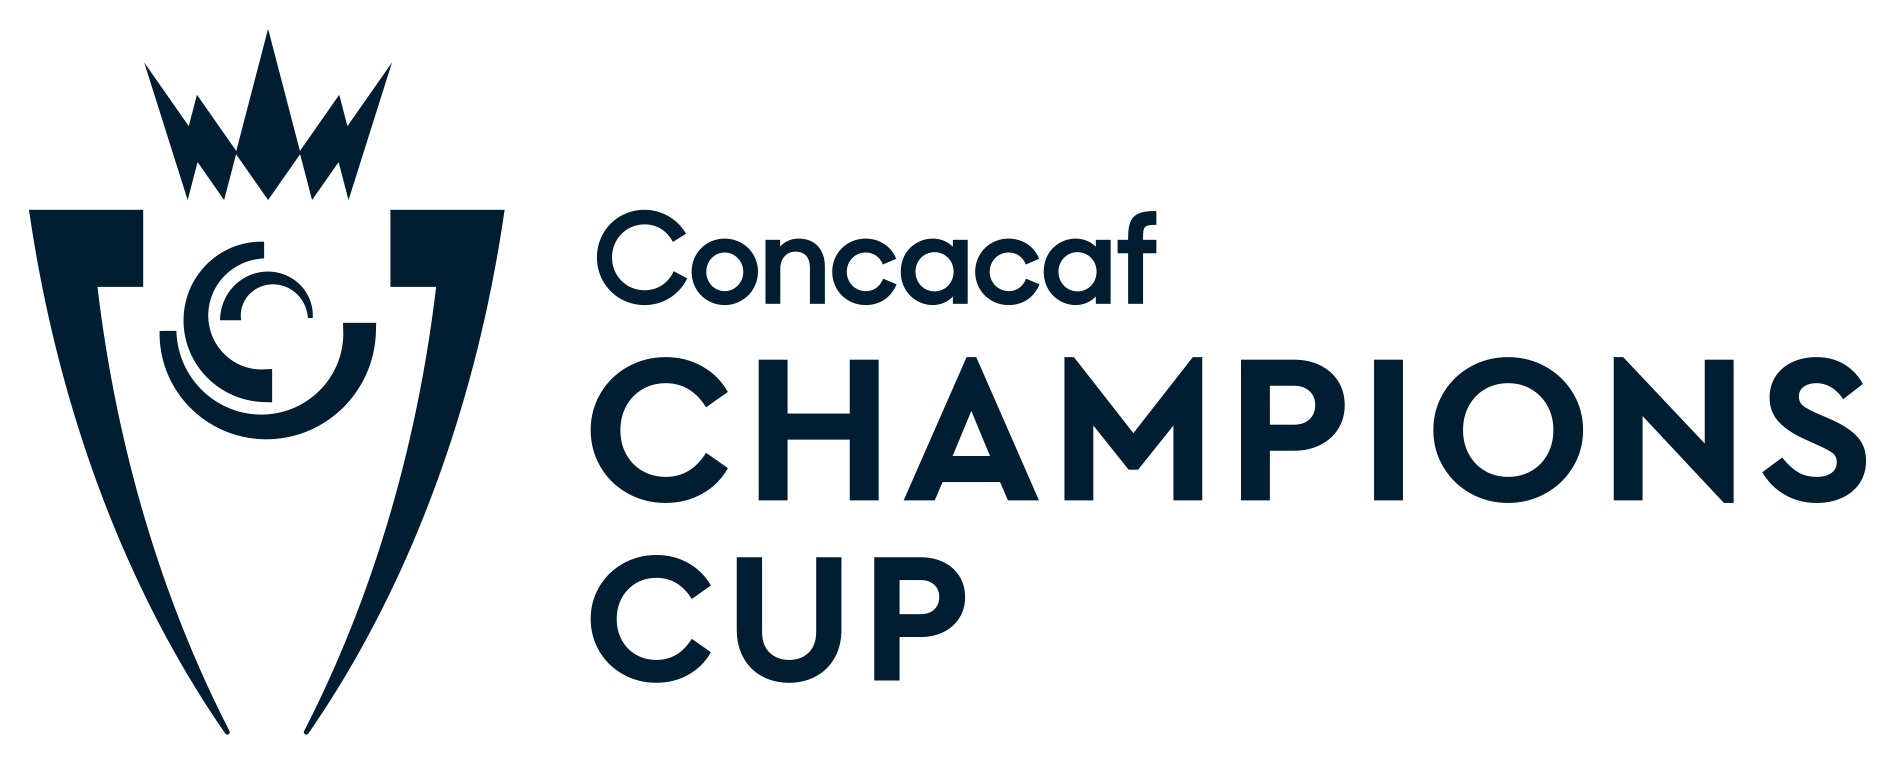 Vancouver win Canadian Championship, claim SCCL berth